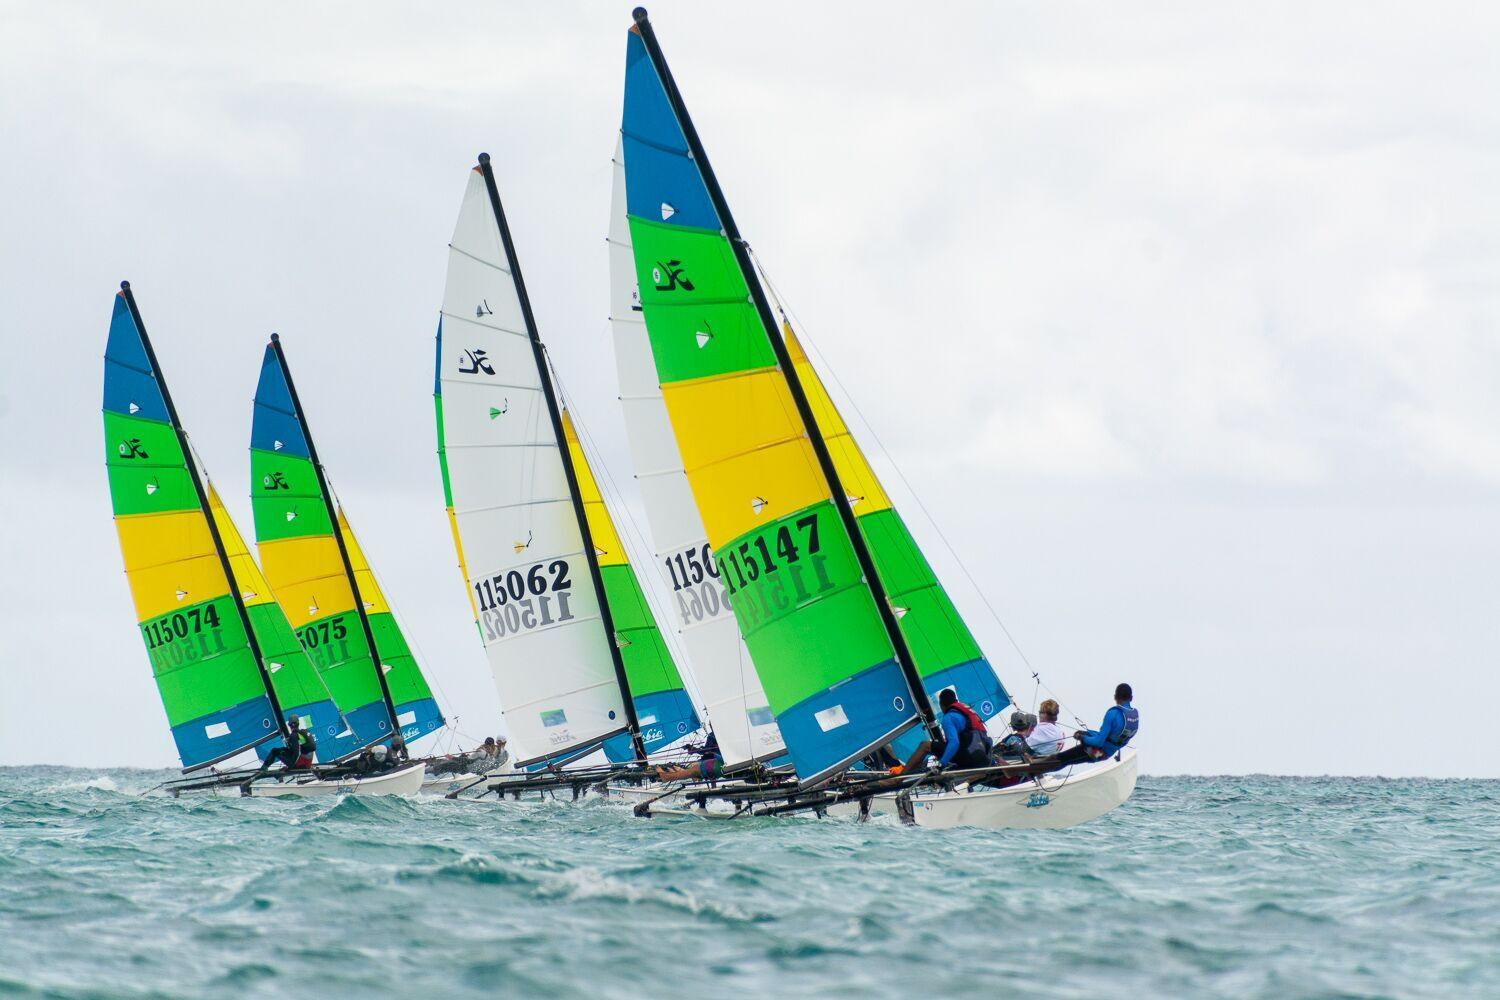 There was plenty of action on the water as sailing nears its conclusion at these Games ©Samoa 2019